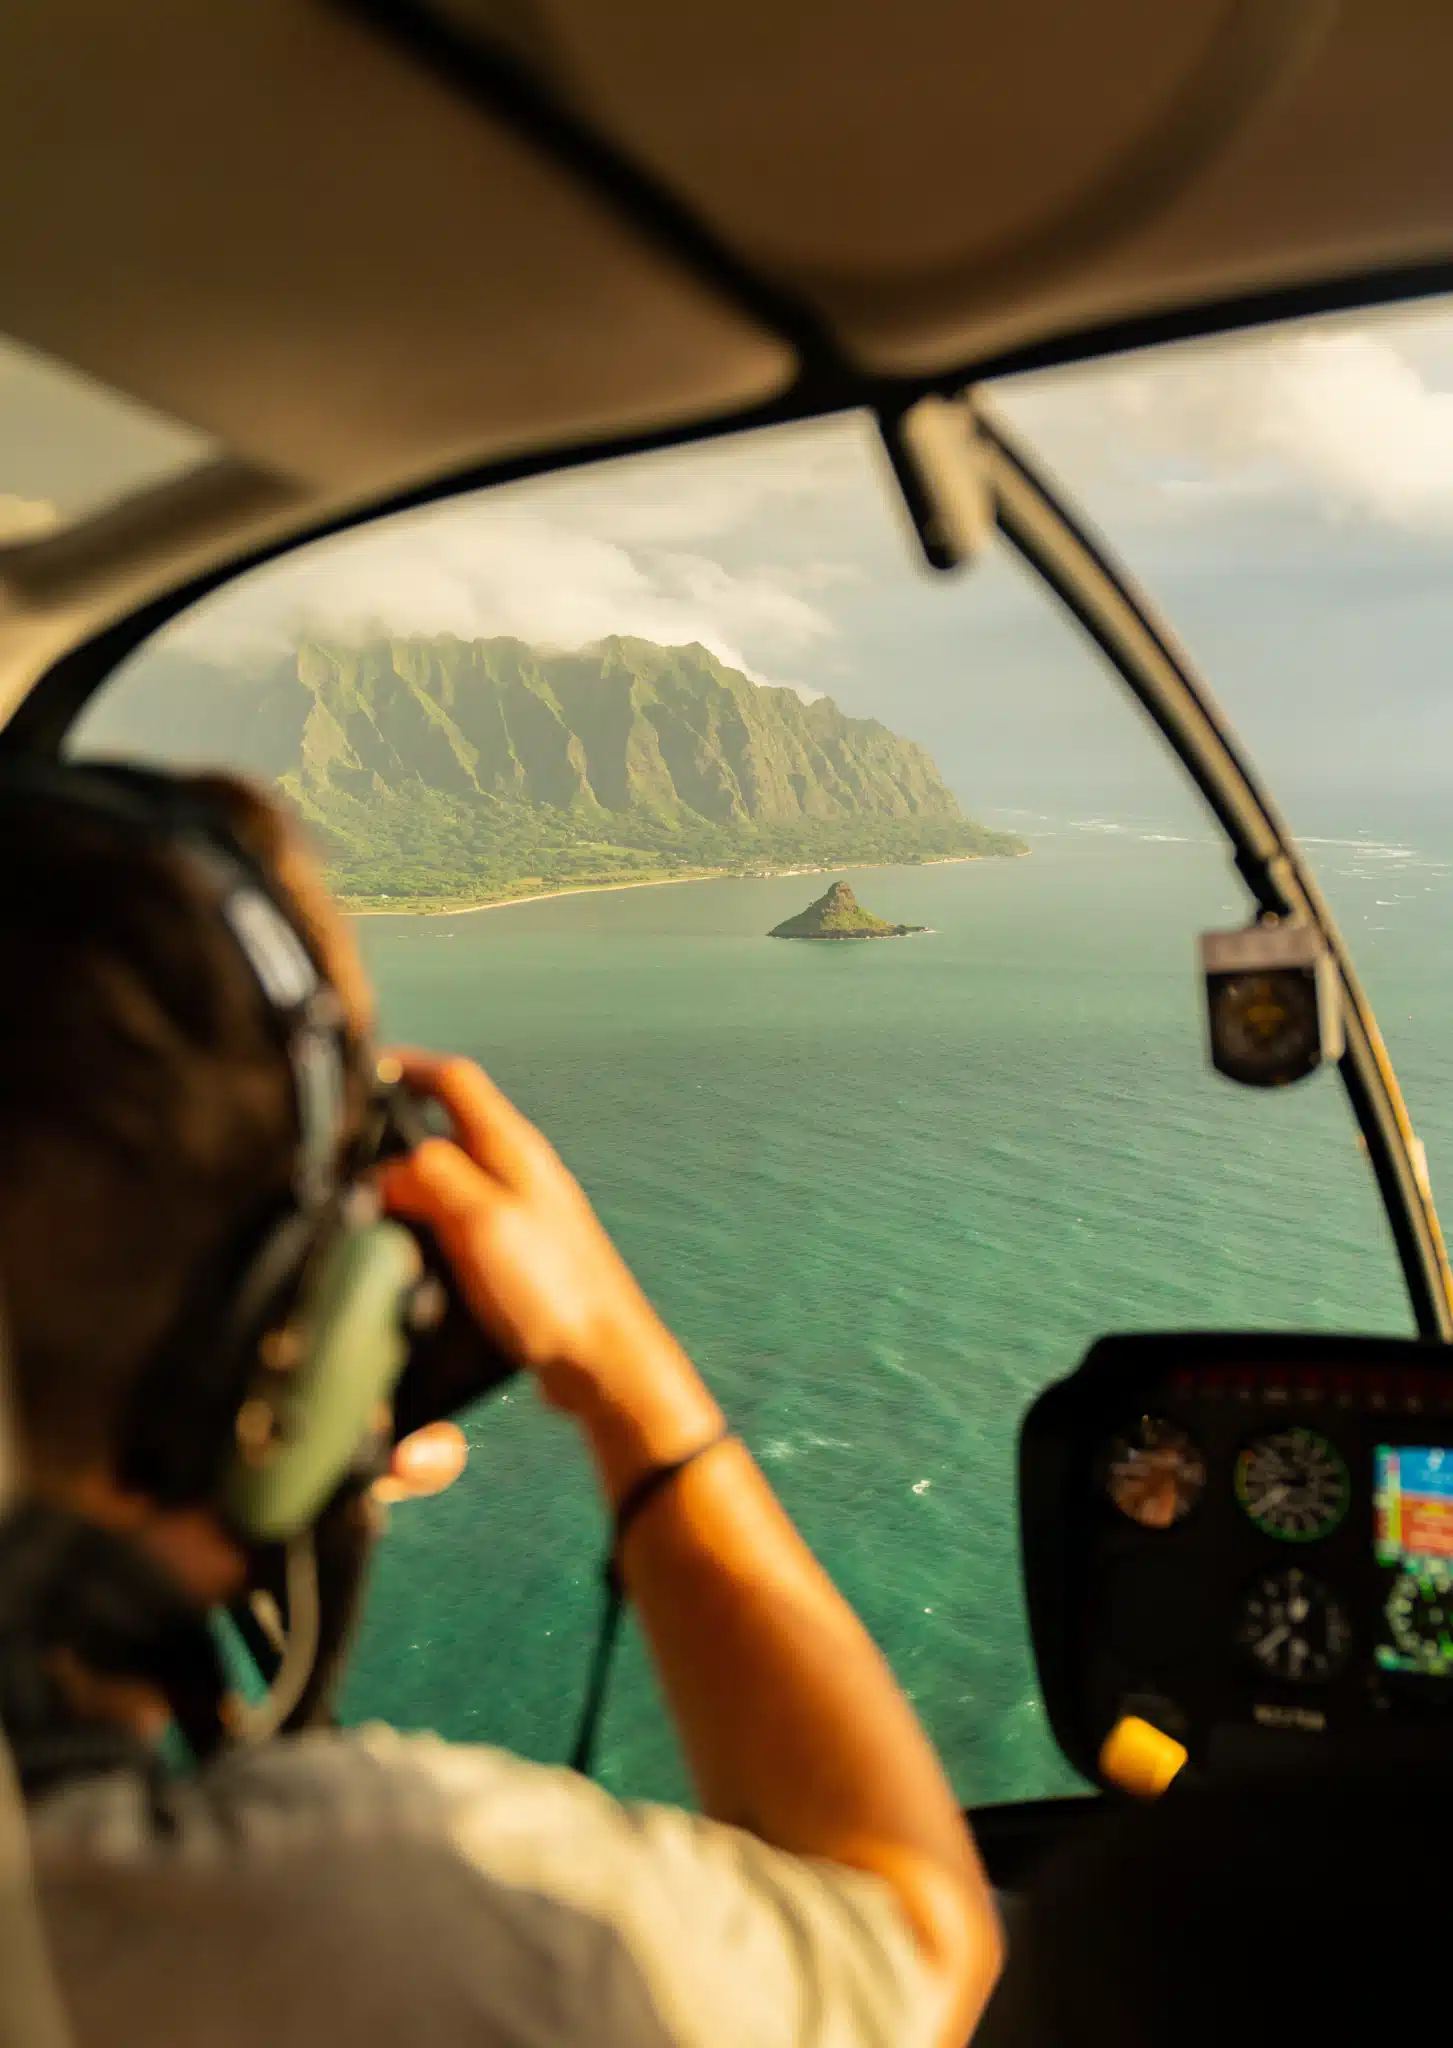 Helicopter Photo Flight is a Air Activity located in the city of Honolulu on Oahu, Hawaii